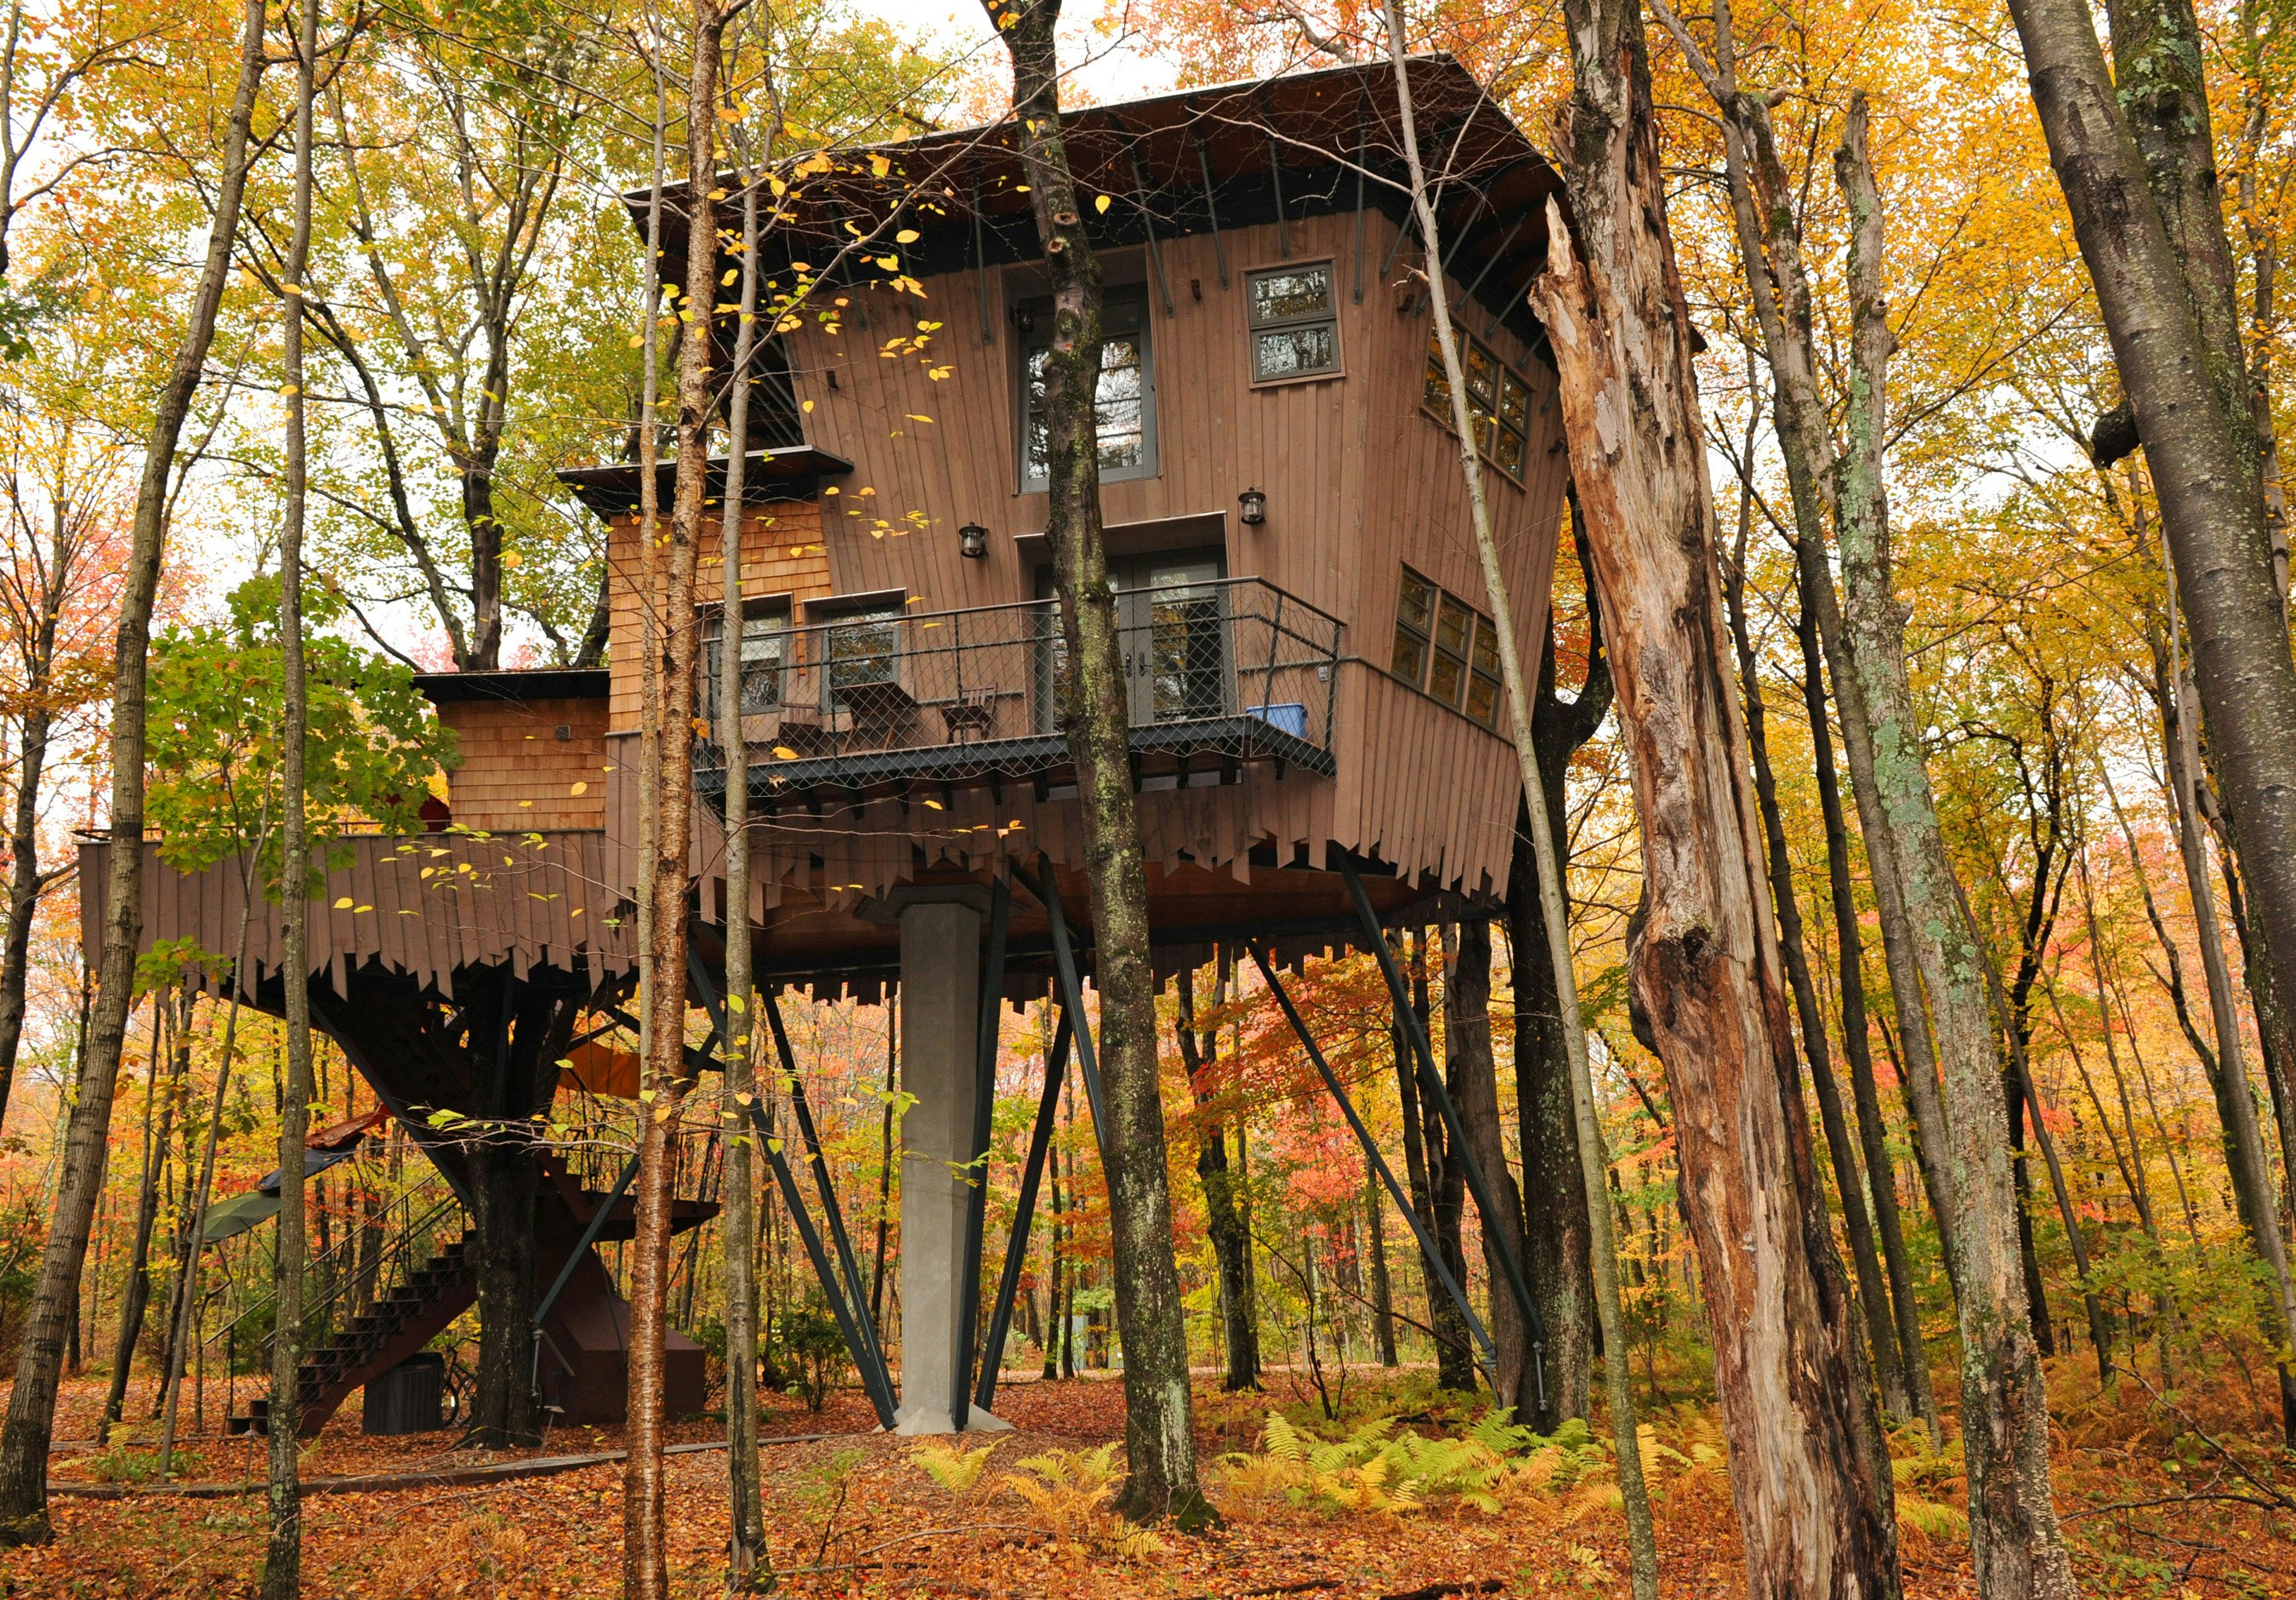 Winvian Treehouse Cottage surrounded by colorful fall leaves in Morris, Connecticut